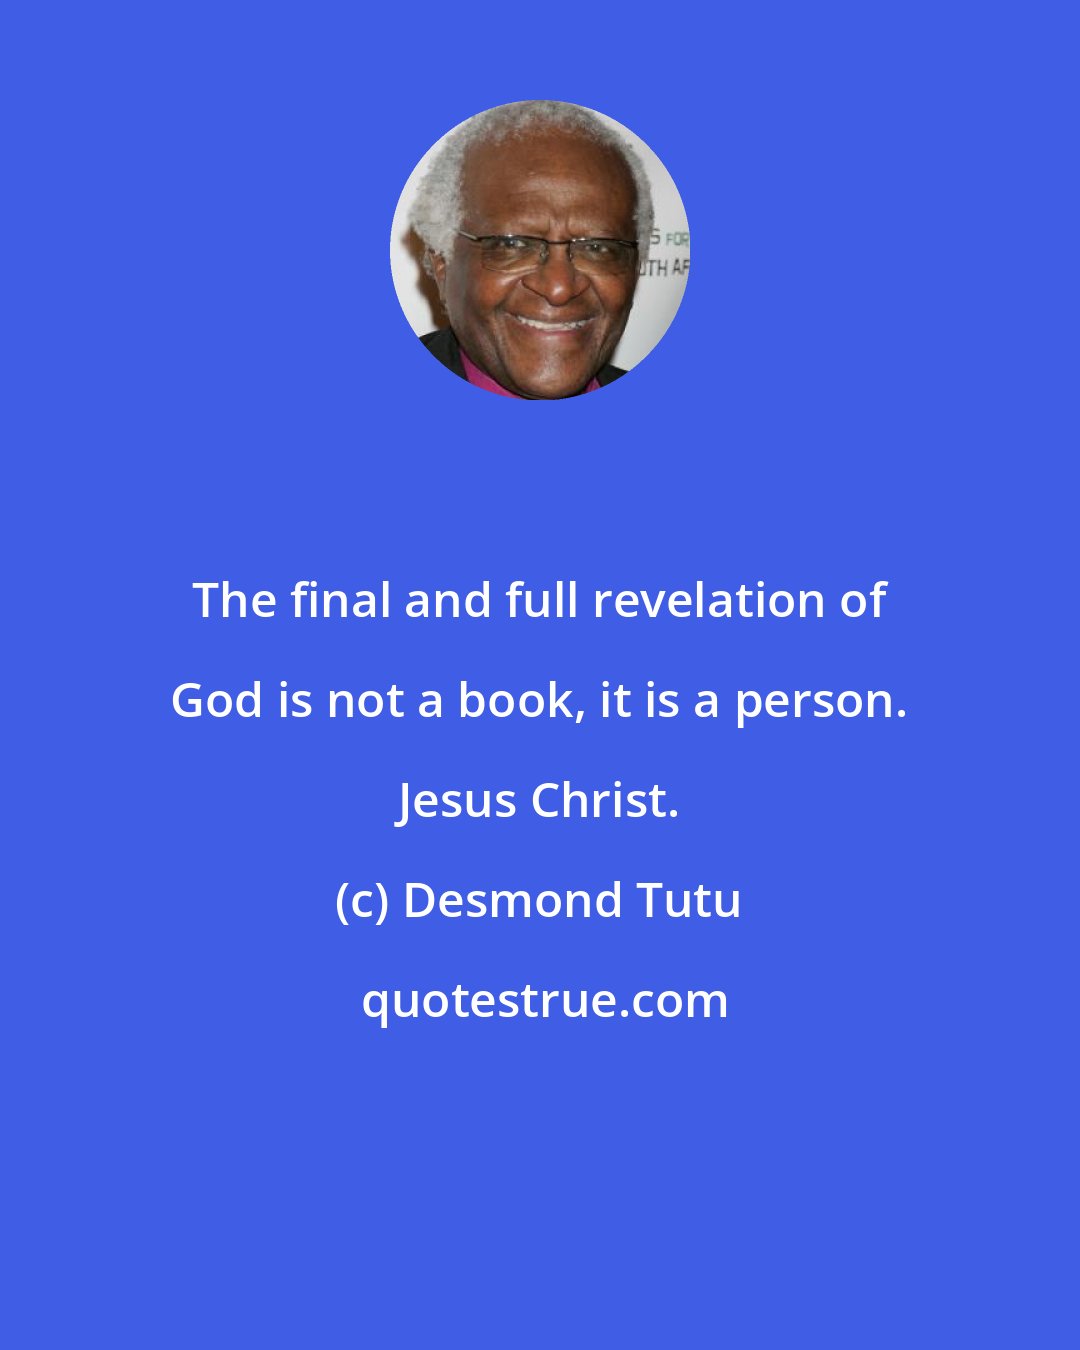 Desmond Tutu: The final and full revelation of God is not a book, it is a person. Jesus Christ.